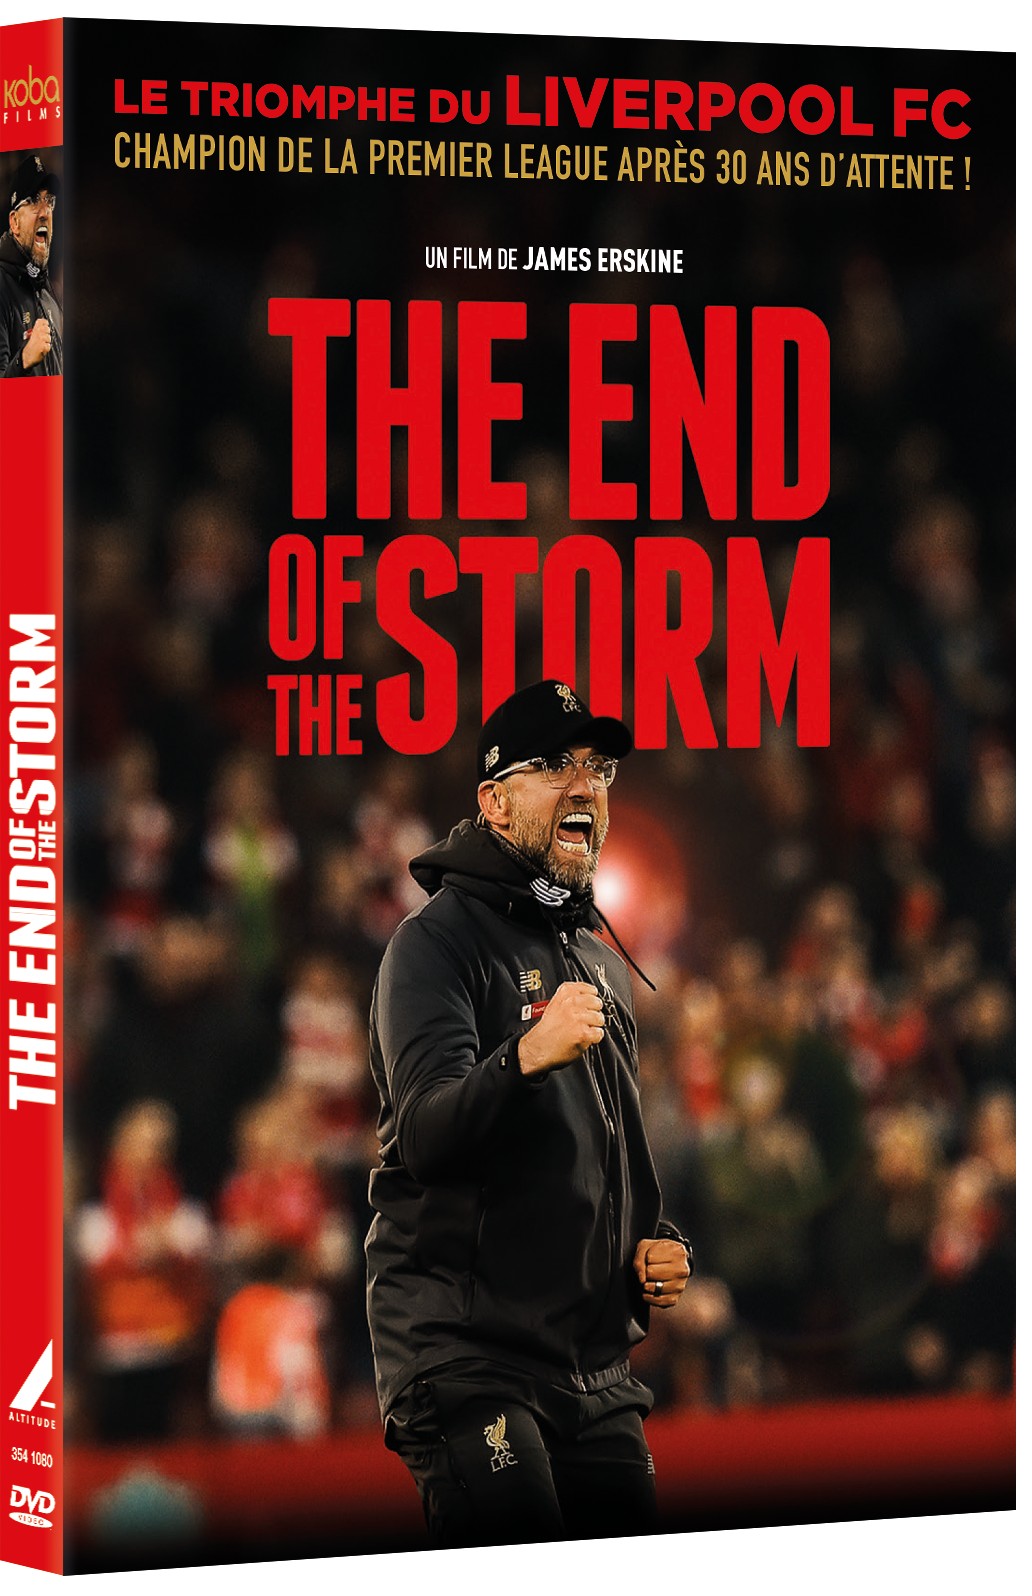 THE END OF THE STORM (DVD)